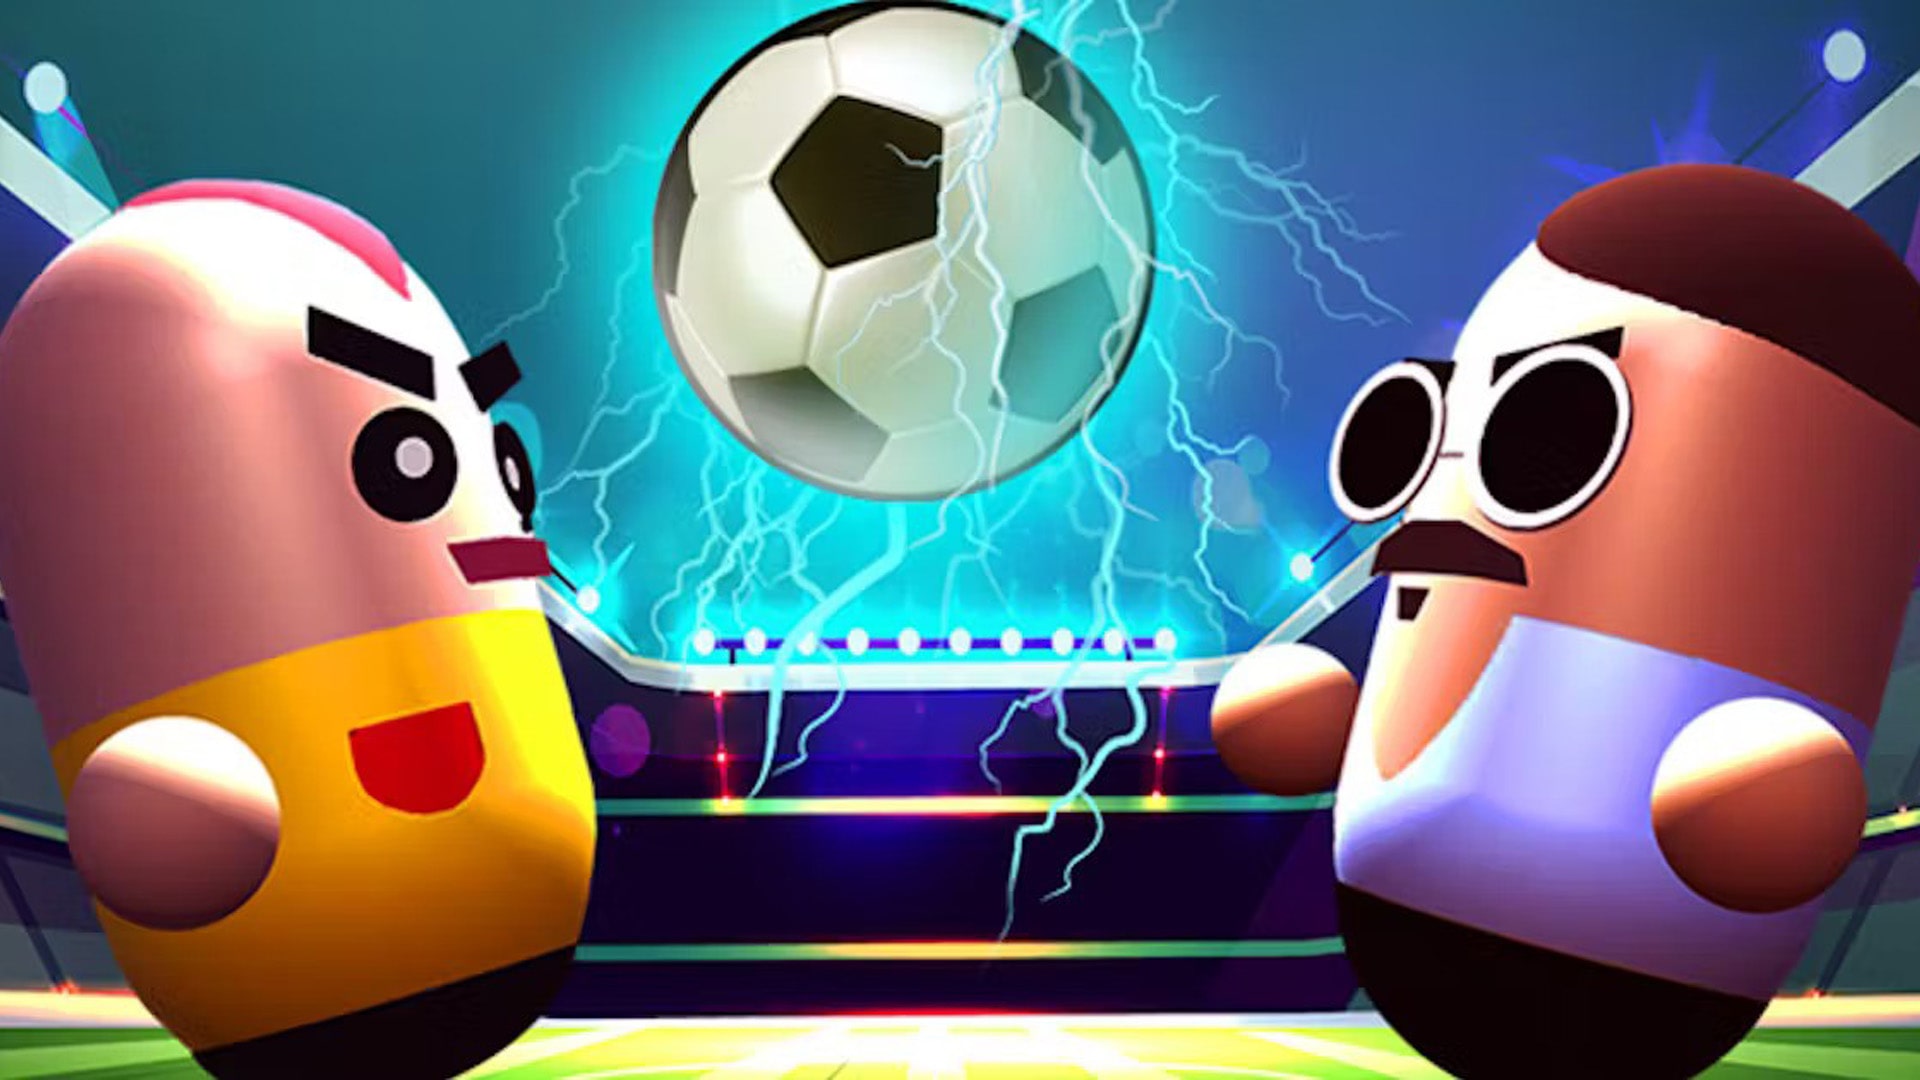 Cartoon-style soccer gameplay from Pill Soccer, featuring pill-shaped players in a competitive match